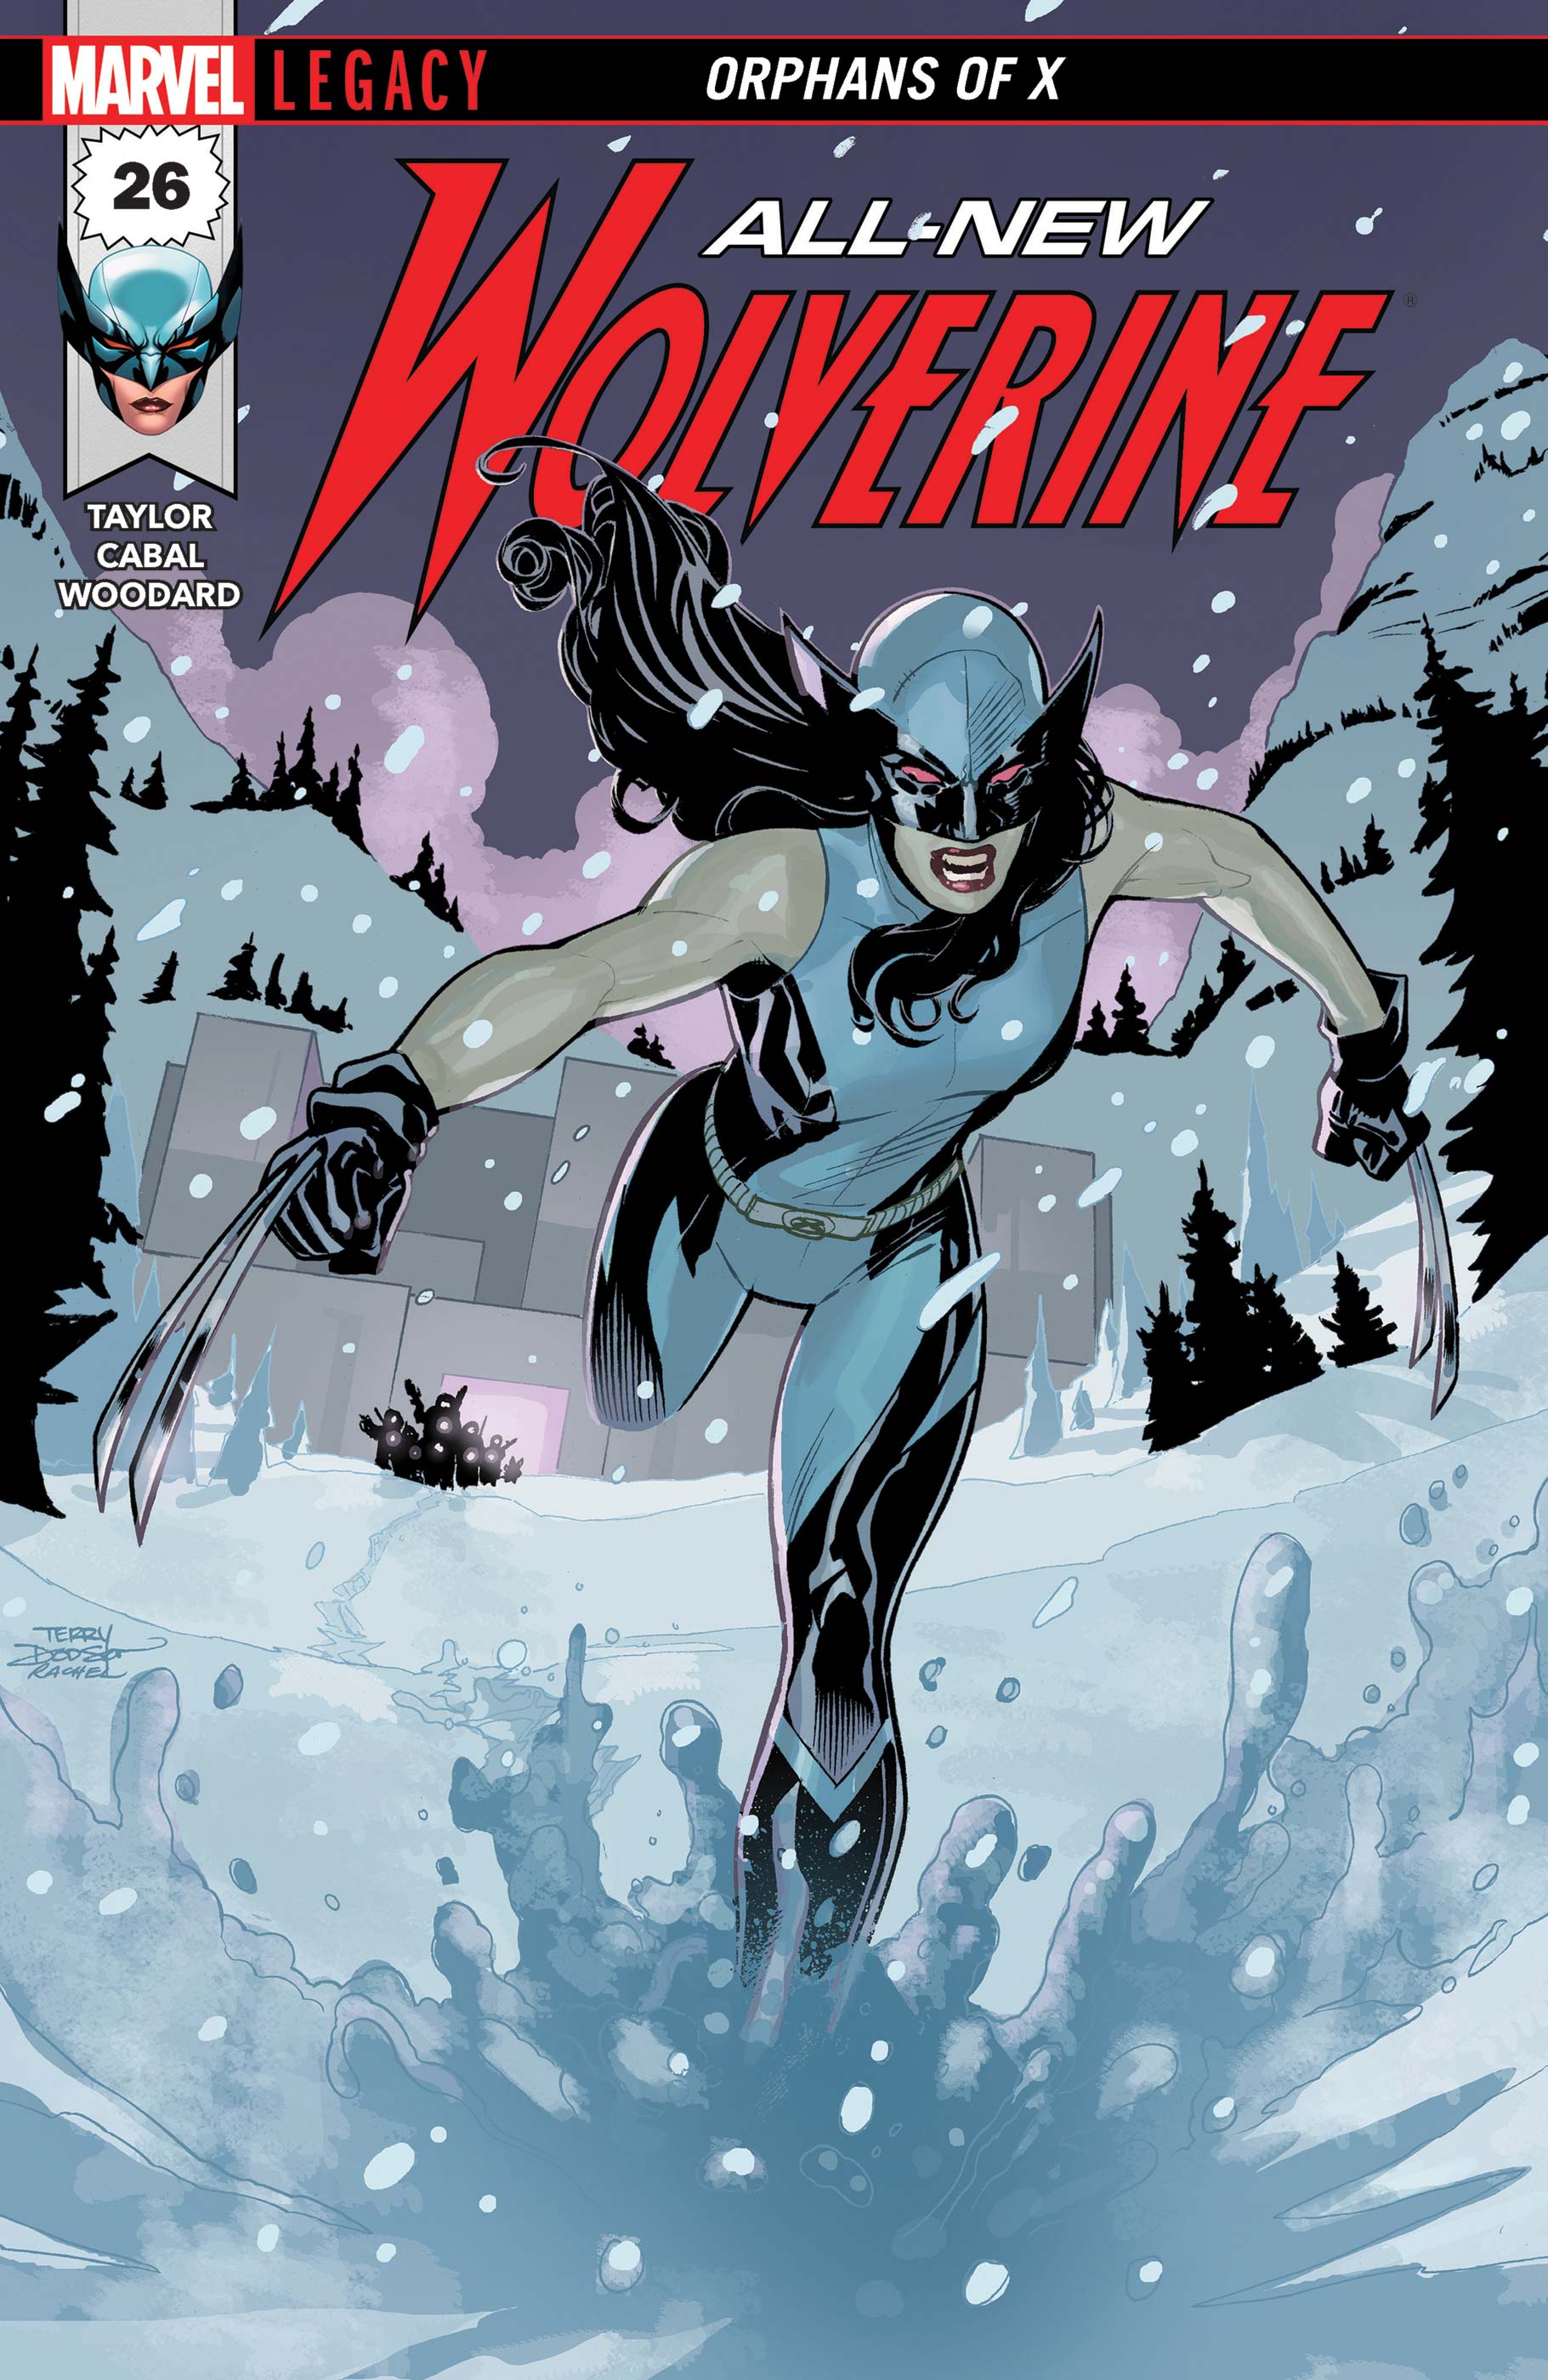 All-New Wolverine (2015) #26